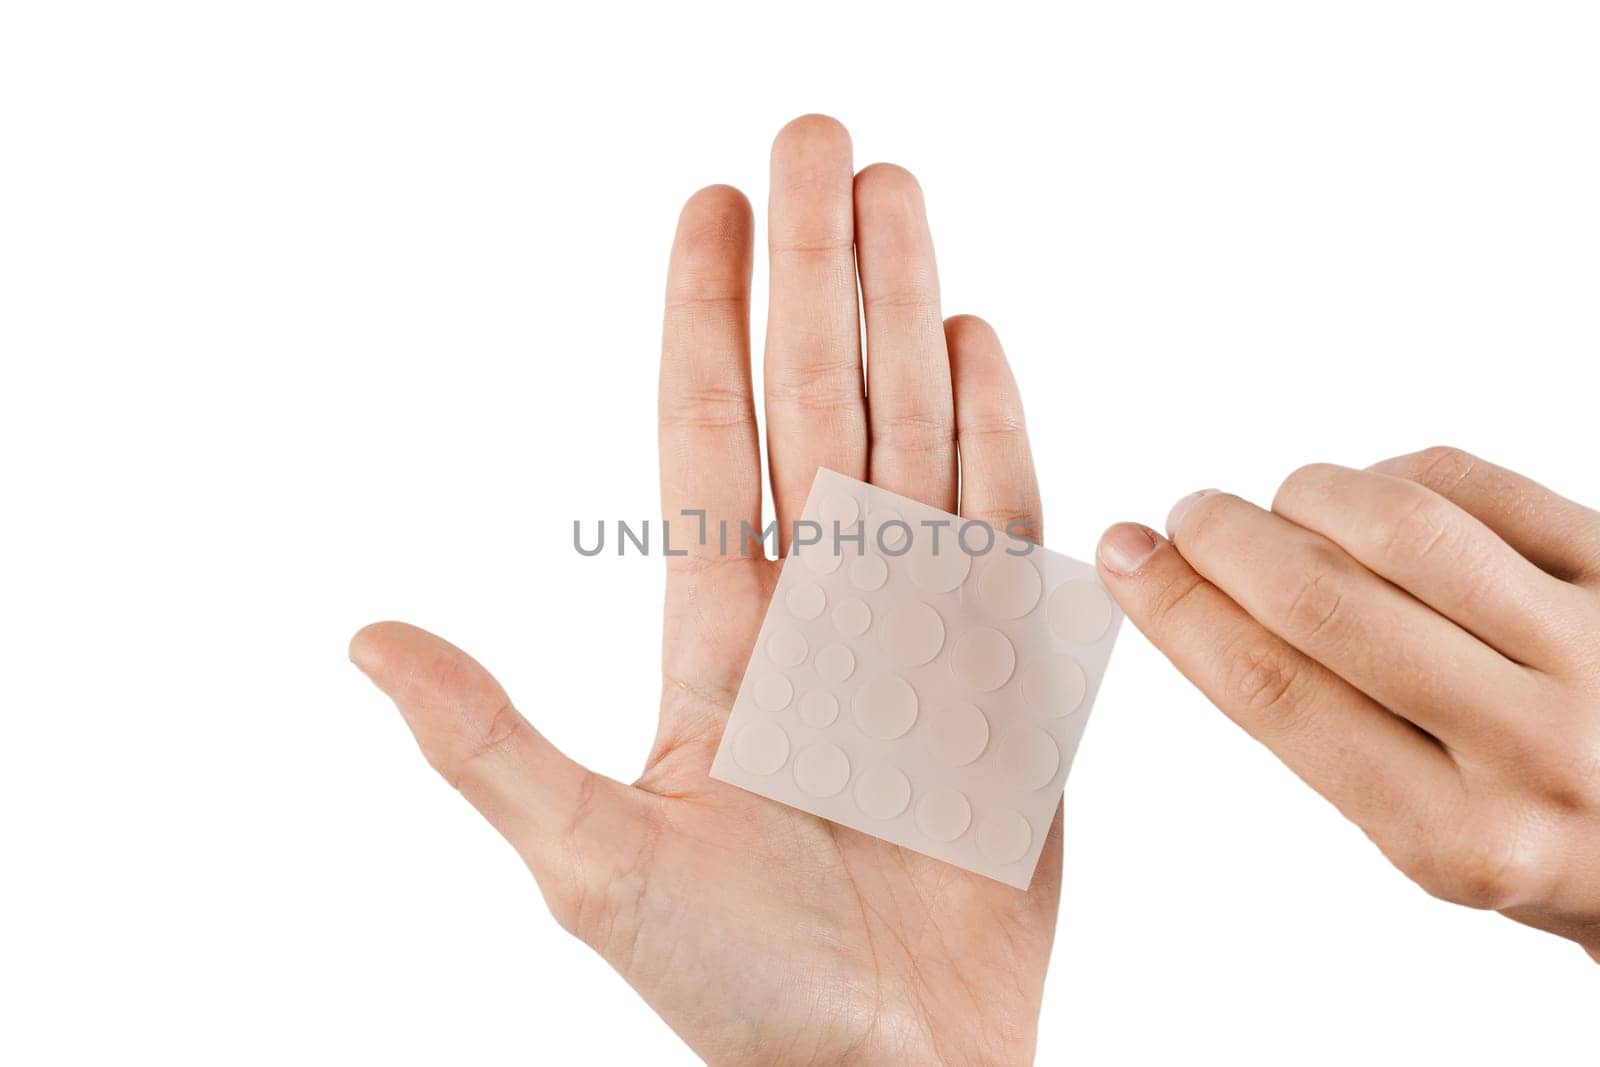 Acne patches for treatment of pimple and rosacea close-up. Facial rejuvenation cleansing cosmetology. Set of round patches for acne in hands on white background